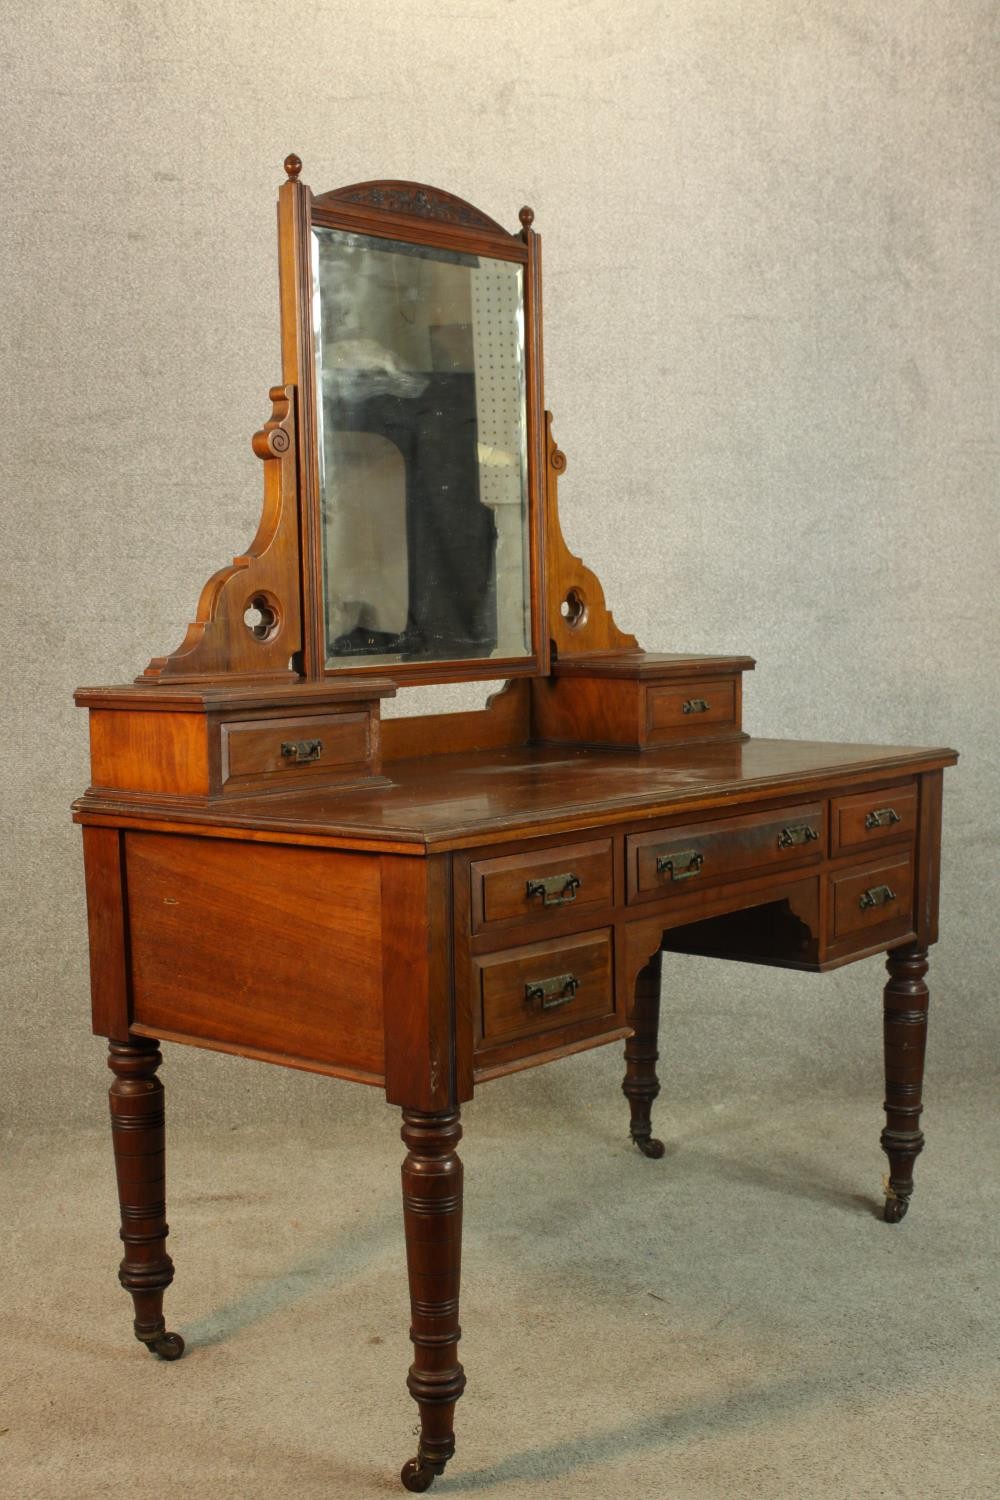 A late 19th/early 20th century walnut mirror backed dressing table with two jewellery drawers - Image 4 of 4